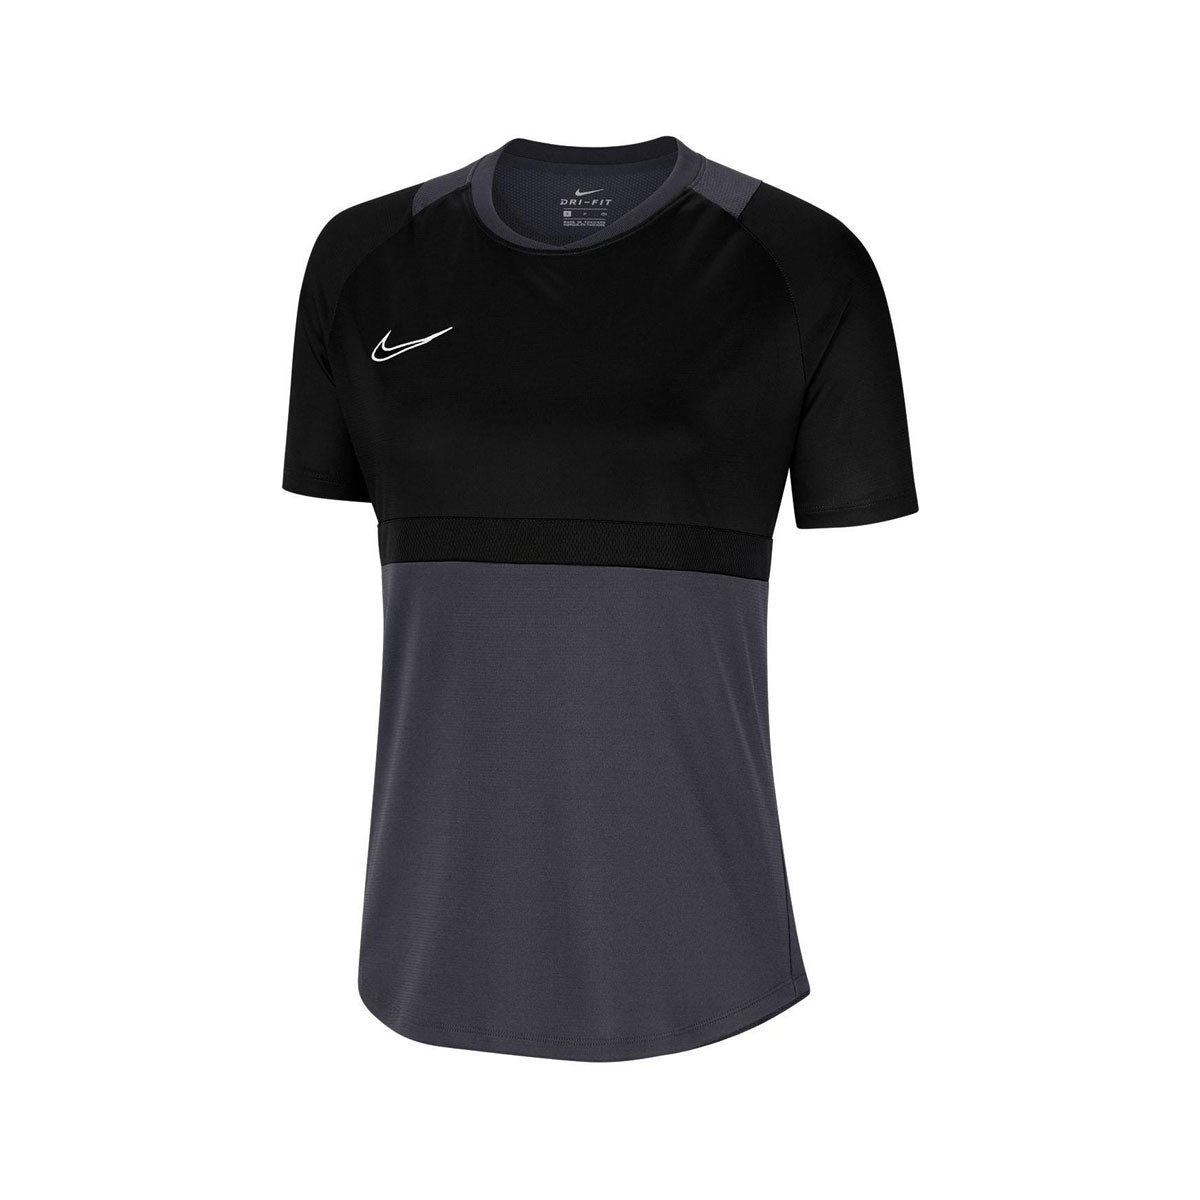 Nike Men's Dry-Fit Academy Pro Soccer Top - KickzStore